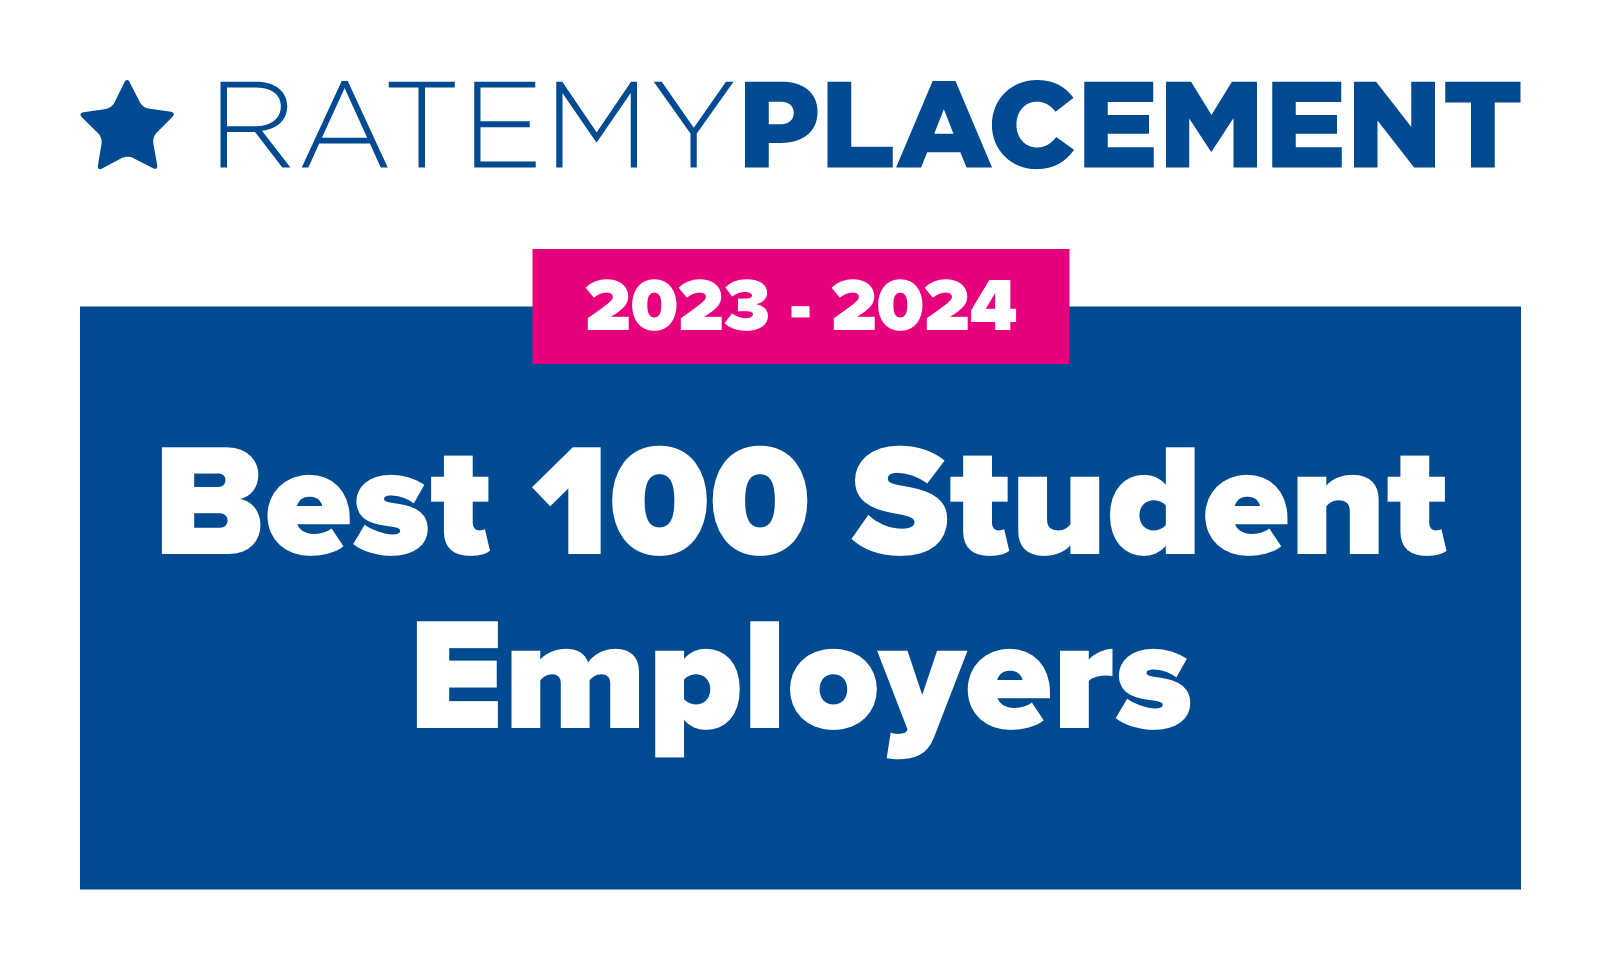 RATEMYPLACEMENT | Best 100 Student Employers 2023-2024